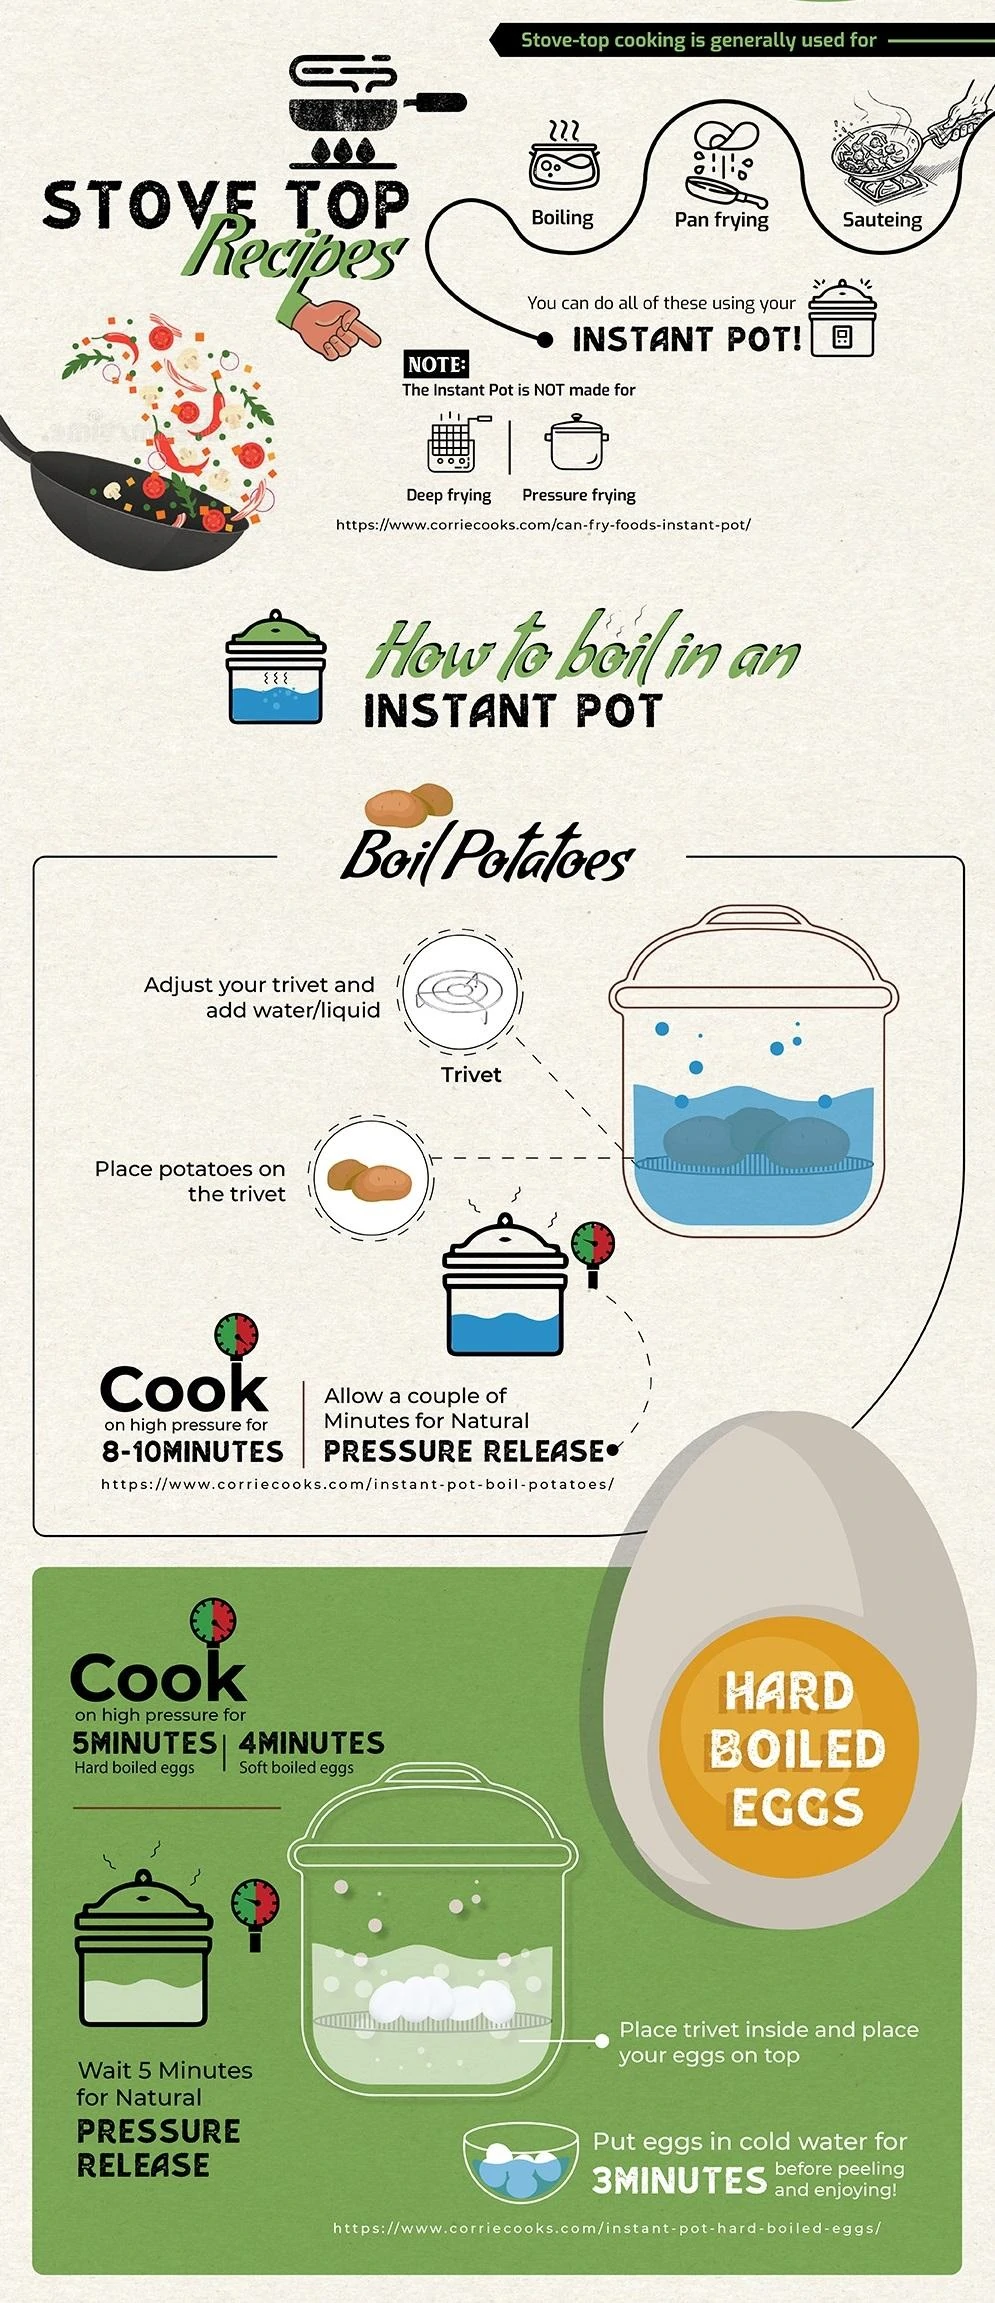 How to Make Stove, Oven, and Steamer Recipes in Your Instant Pot? 1